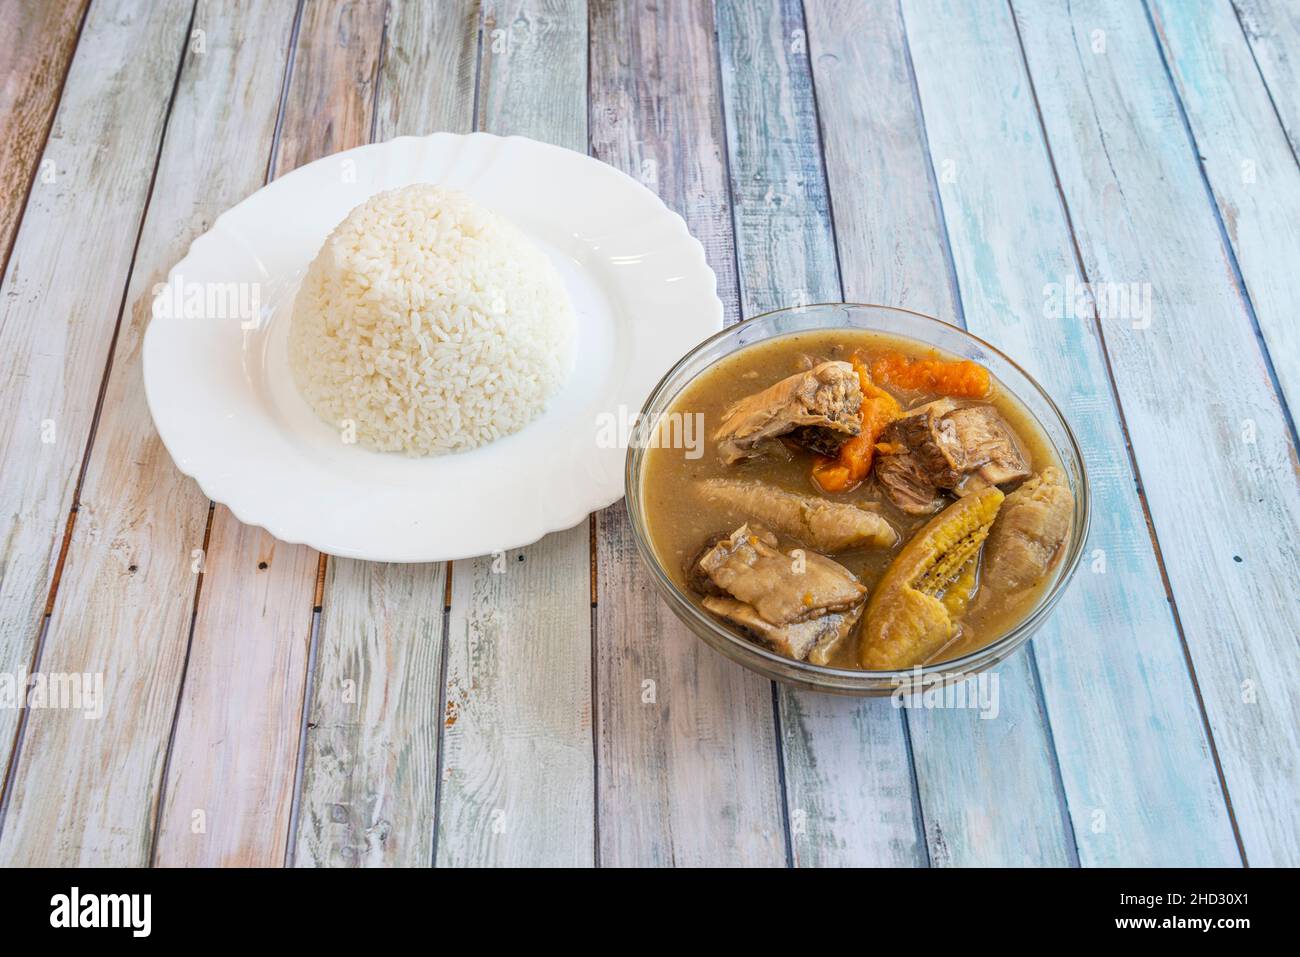 Sancocho is a stew made with tubers, vegetables, condiments, meats and a plate of white rice. Stock Photo